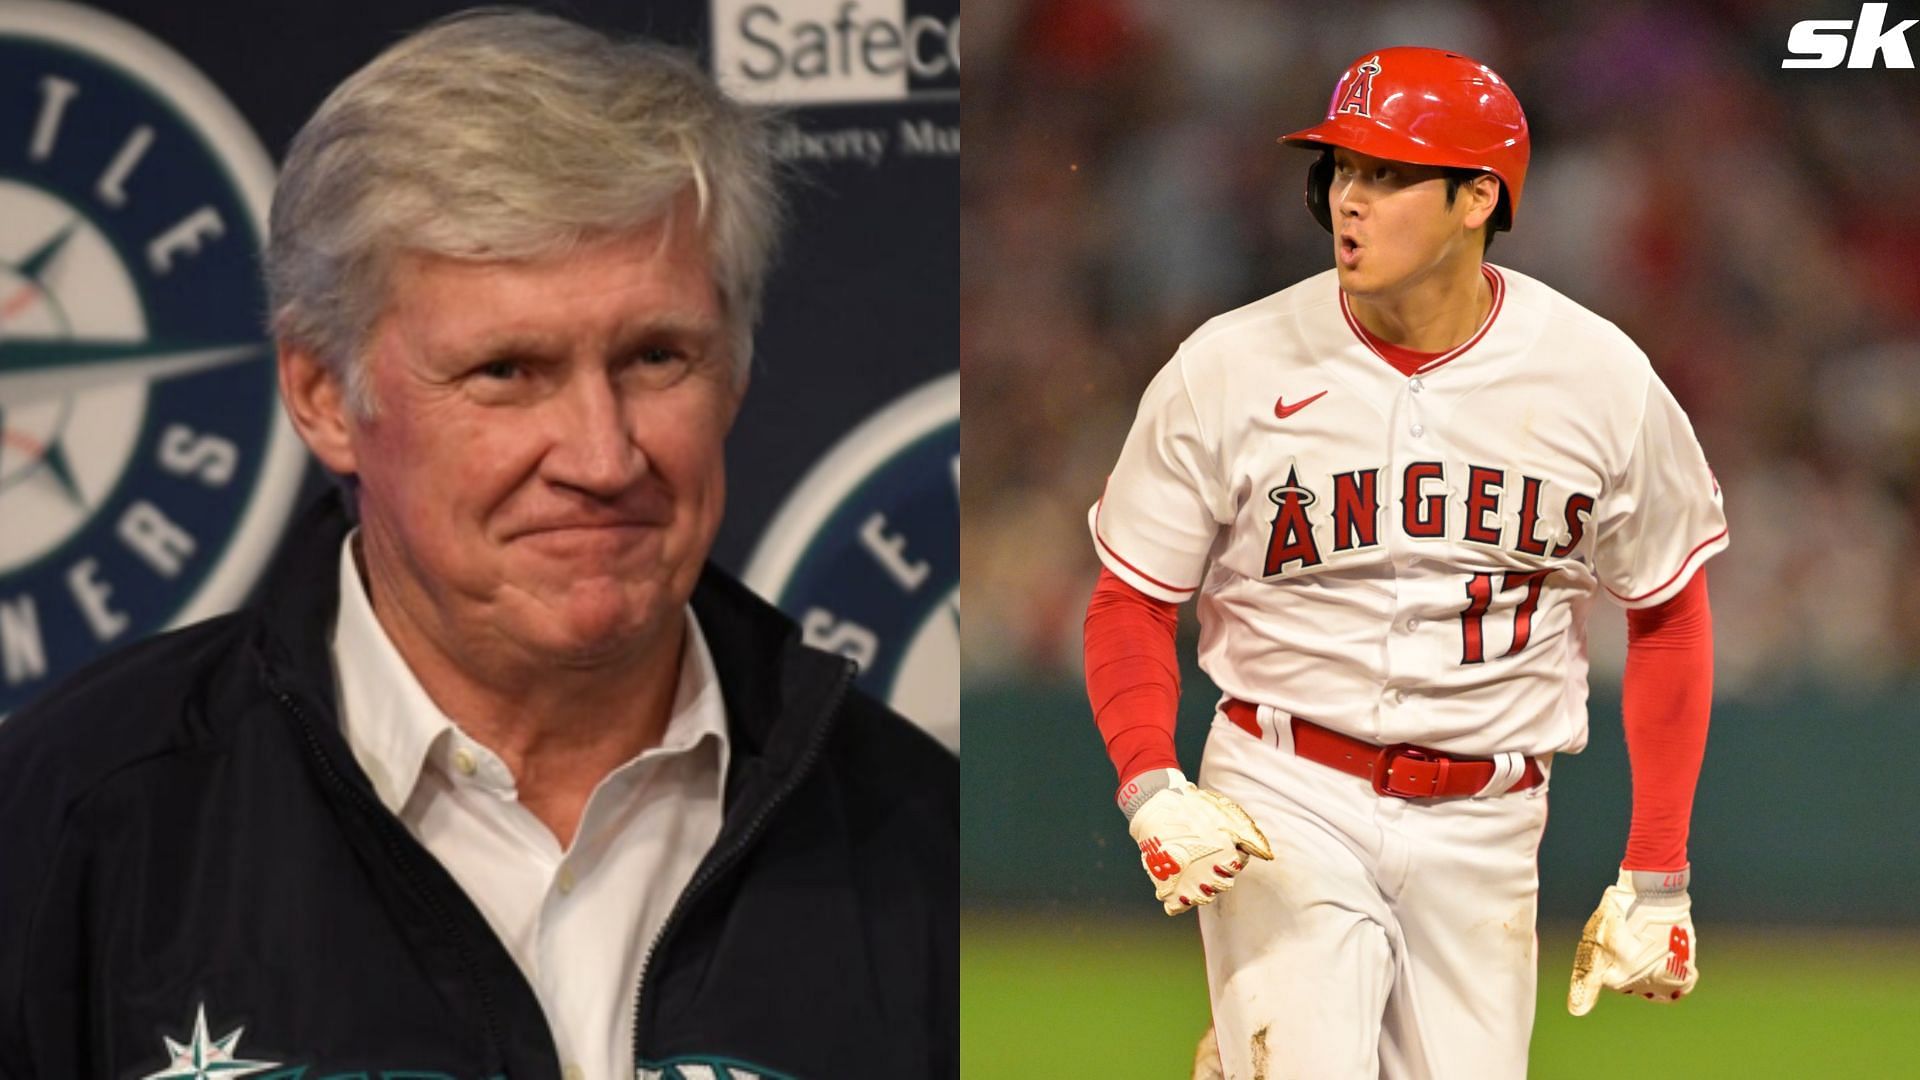 Seattle Mariners owner John Stanton remains non-committal on the prospect of pursuing Shohei Ohtani in free agency